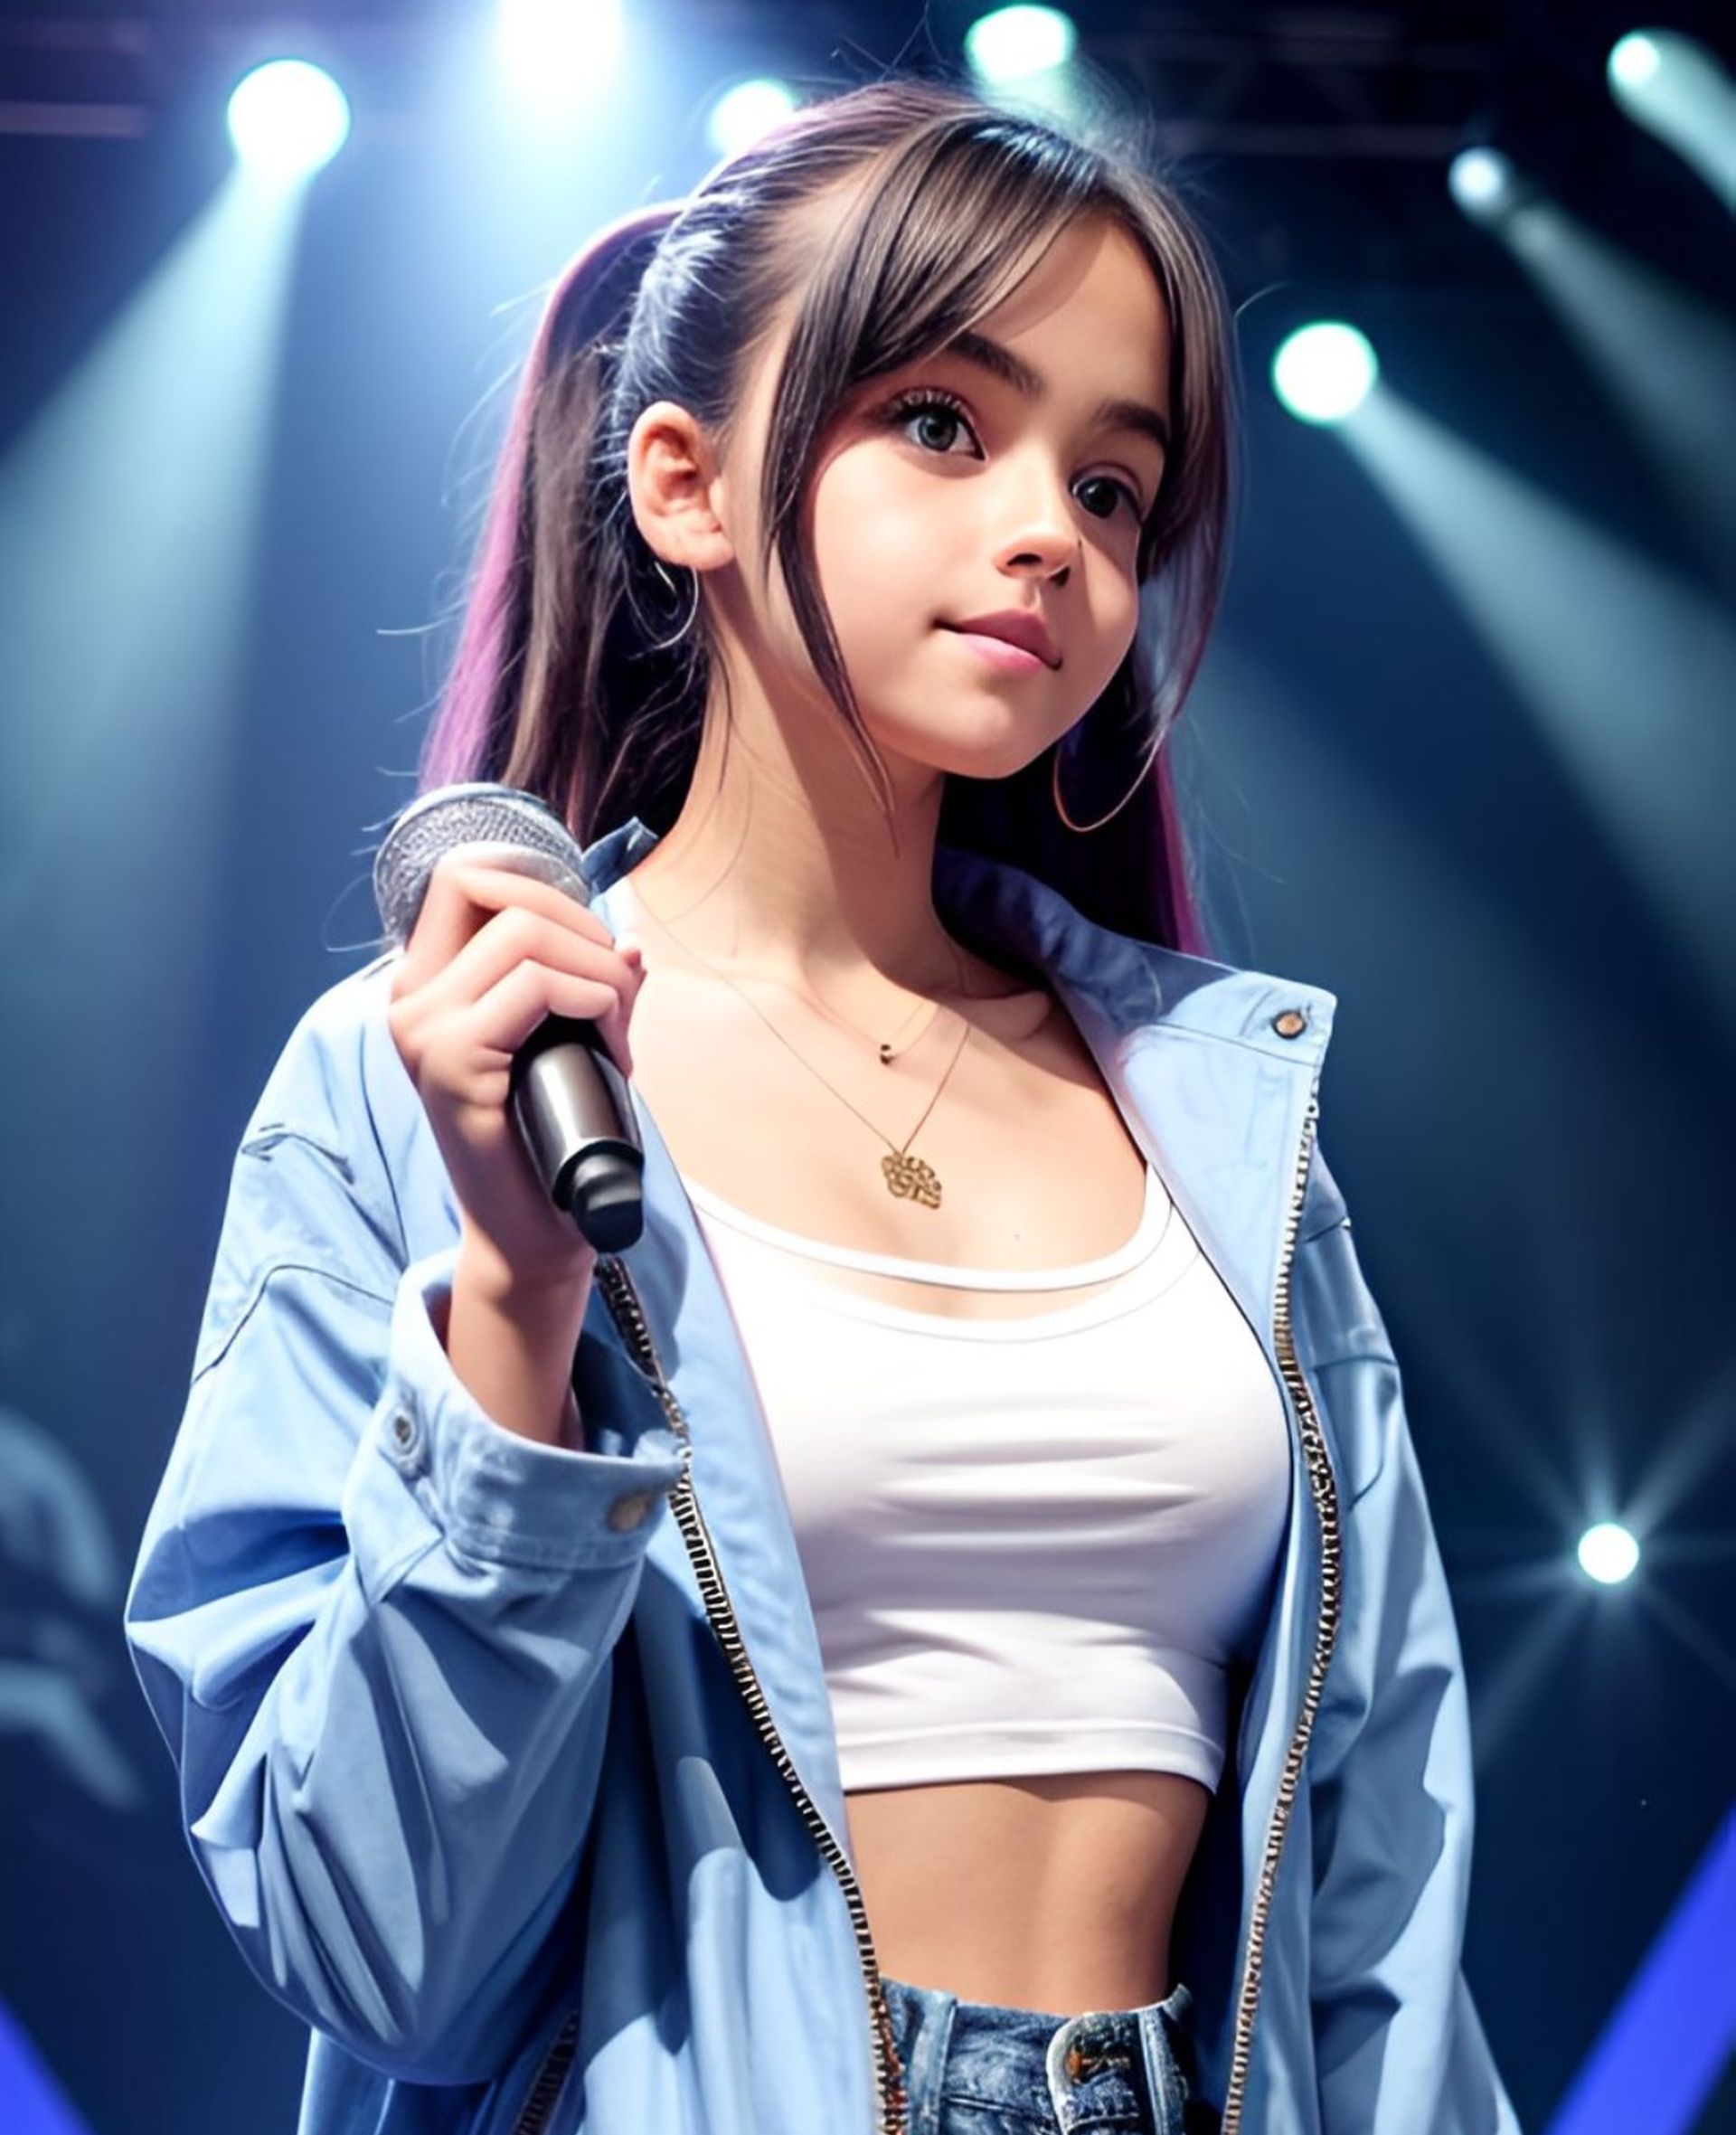 Free photo Girl, with microphone in hand, standing on stage, photo